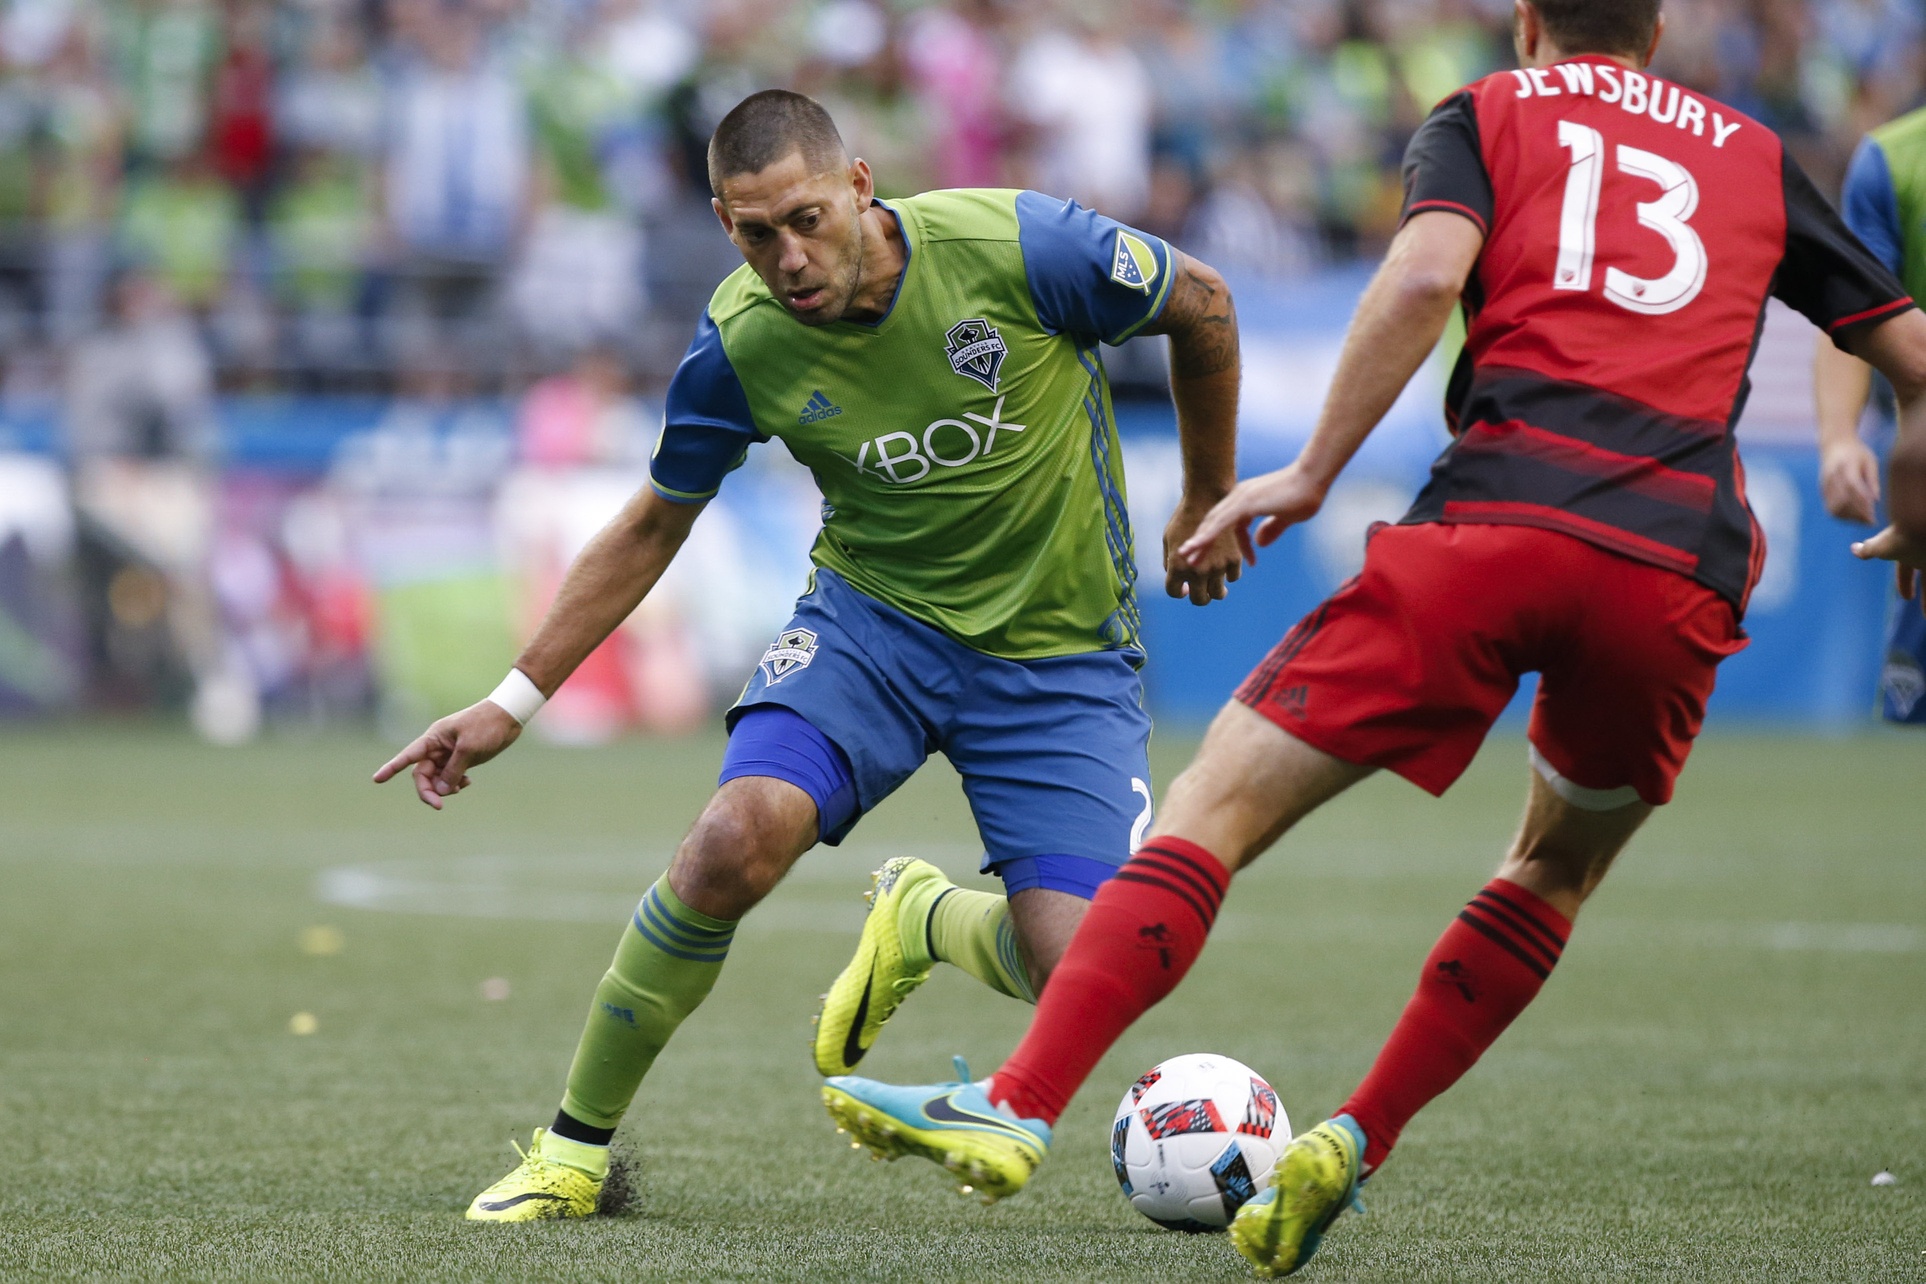 MLS Soccer News: Seattle Sounders Defeat Portland Timbers at CenturyLink Field